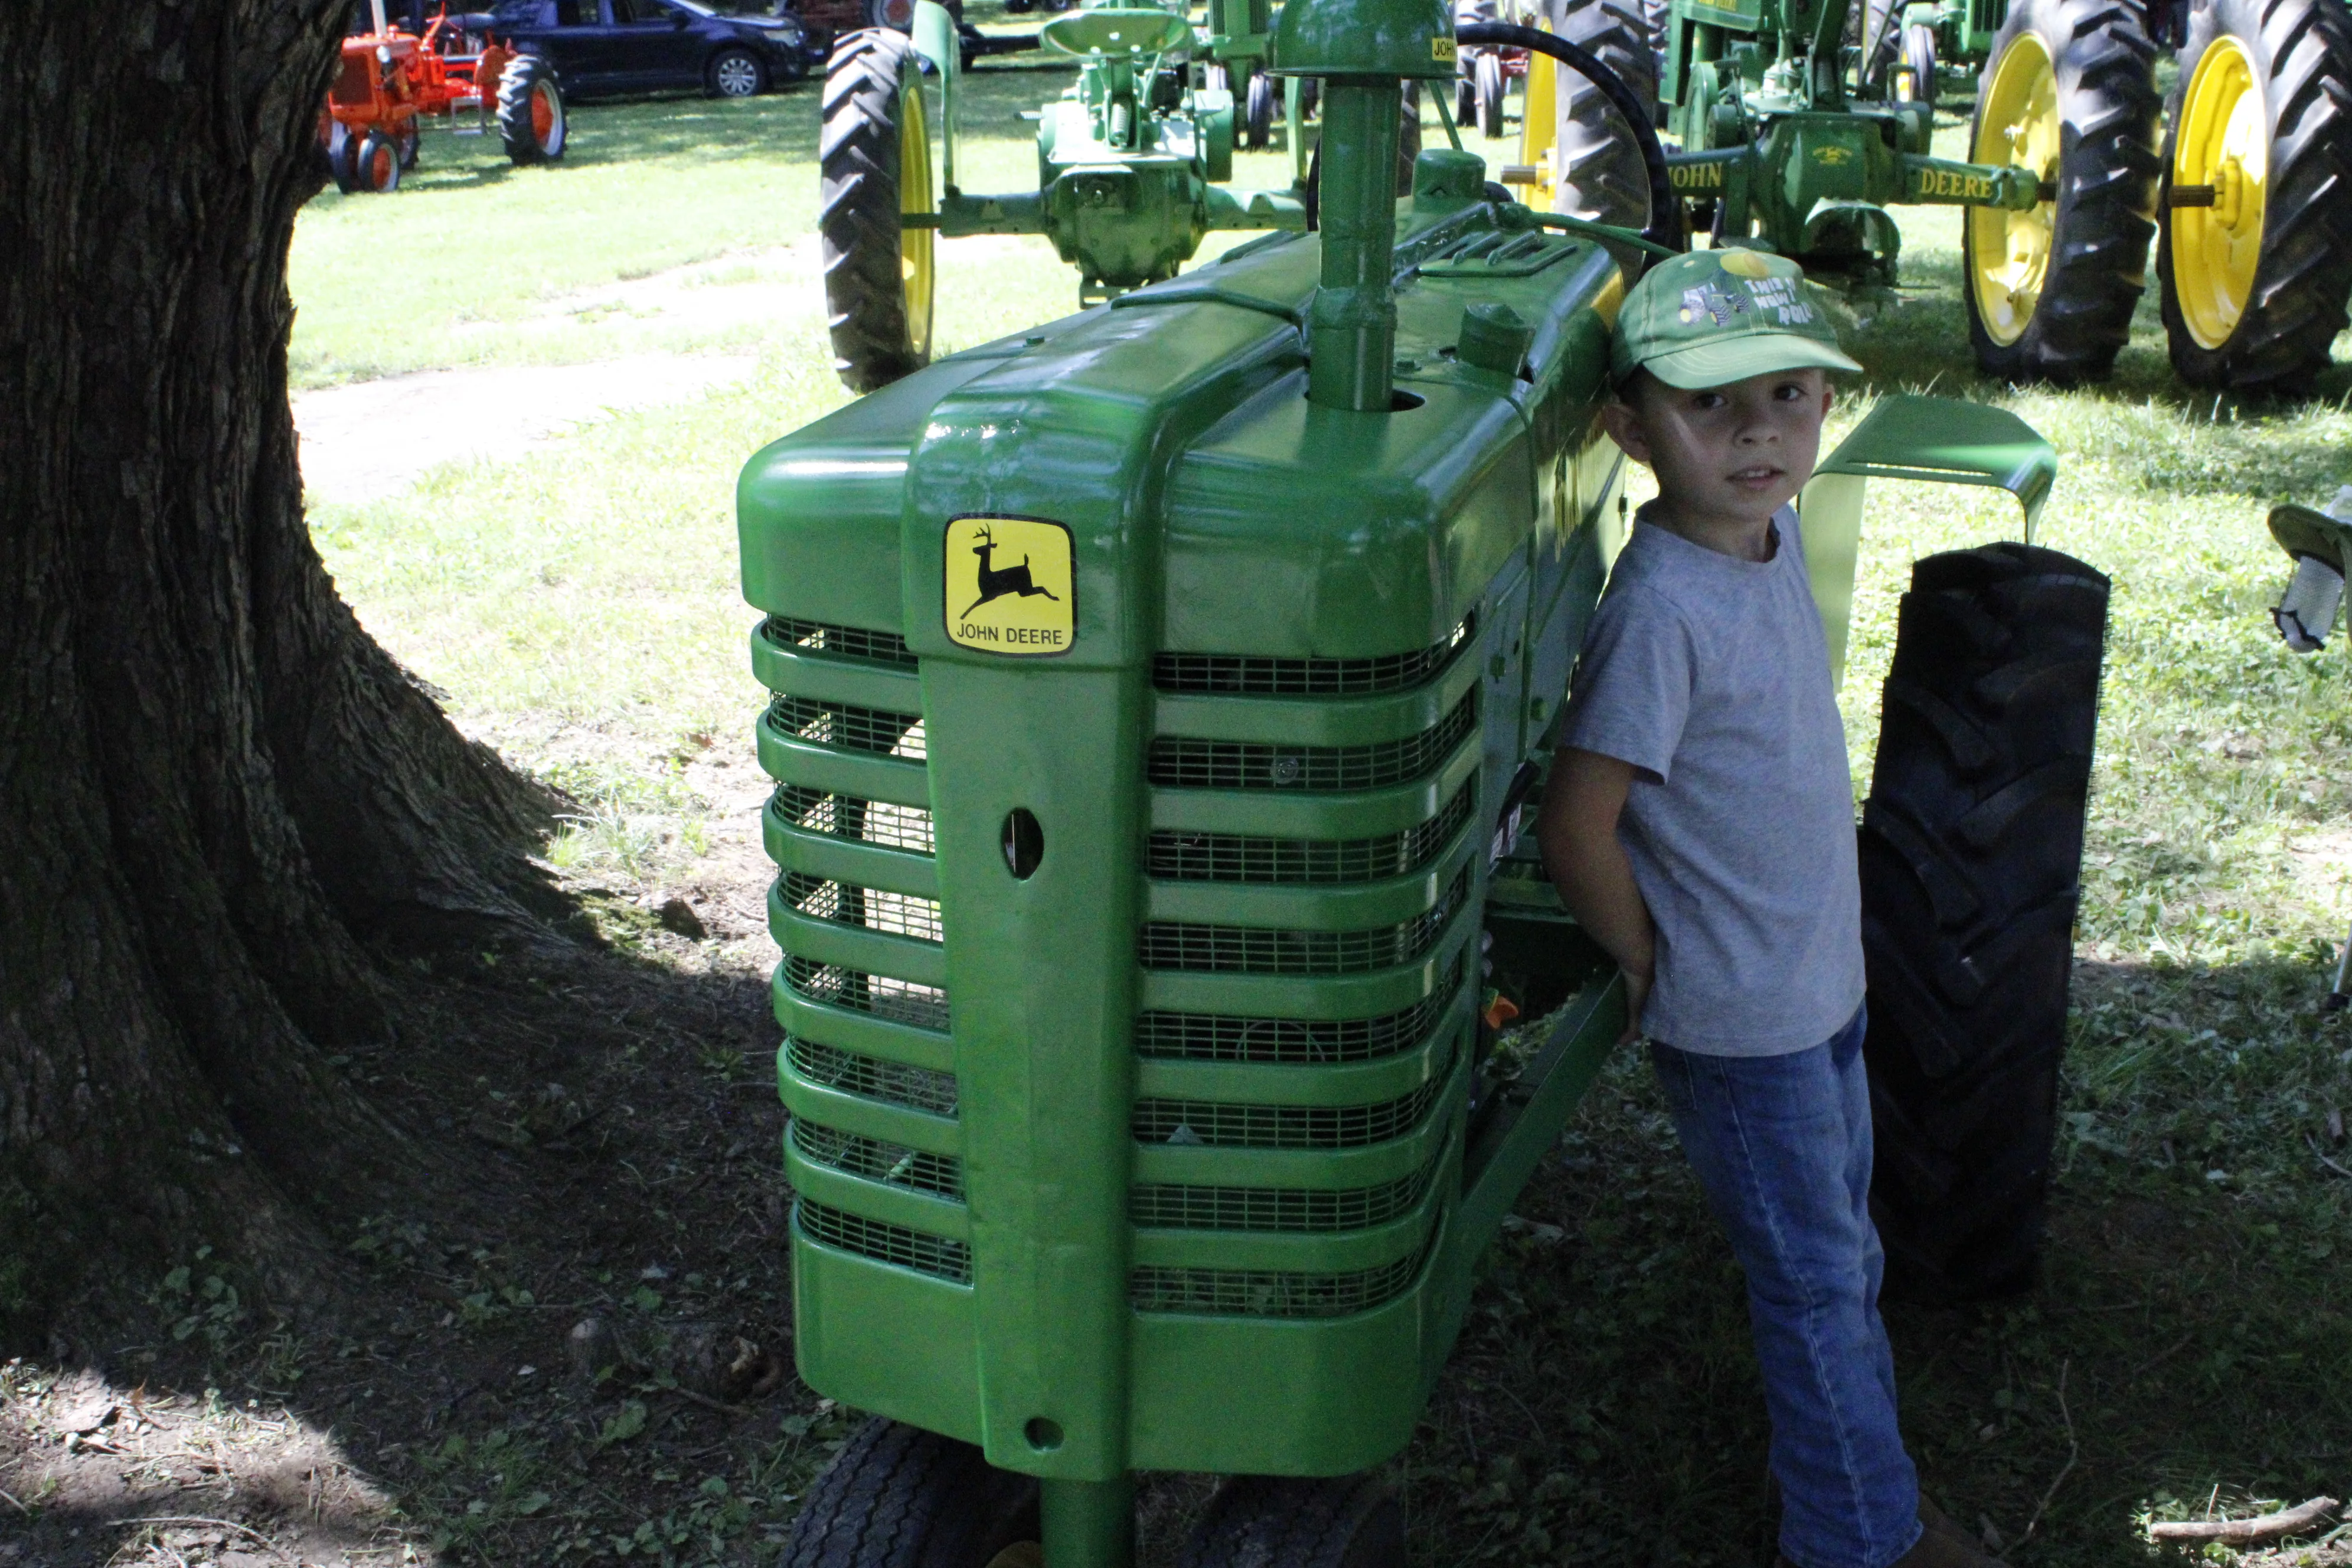 2023-hopkinsville-tractor-small-engine-show-15-jpg-3